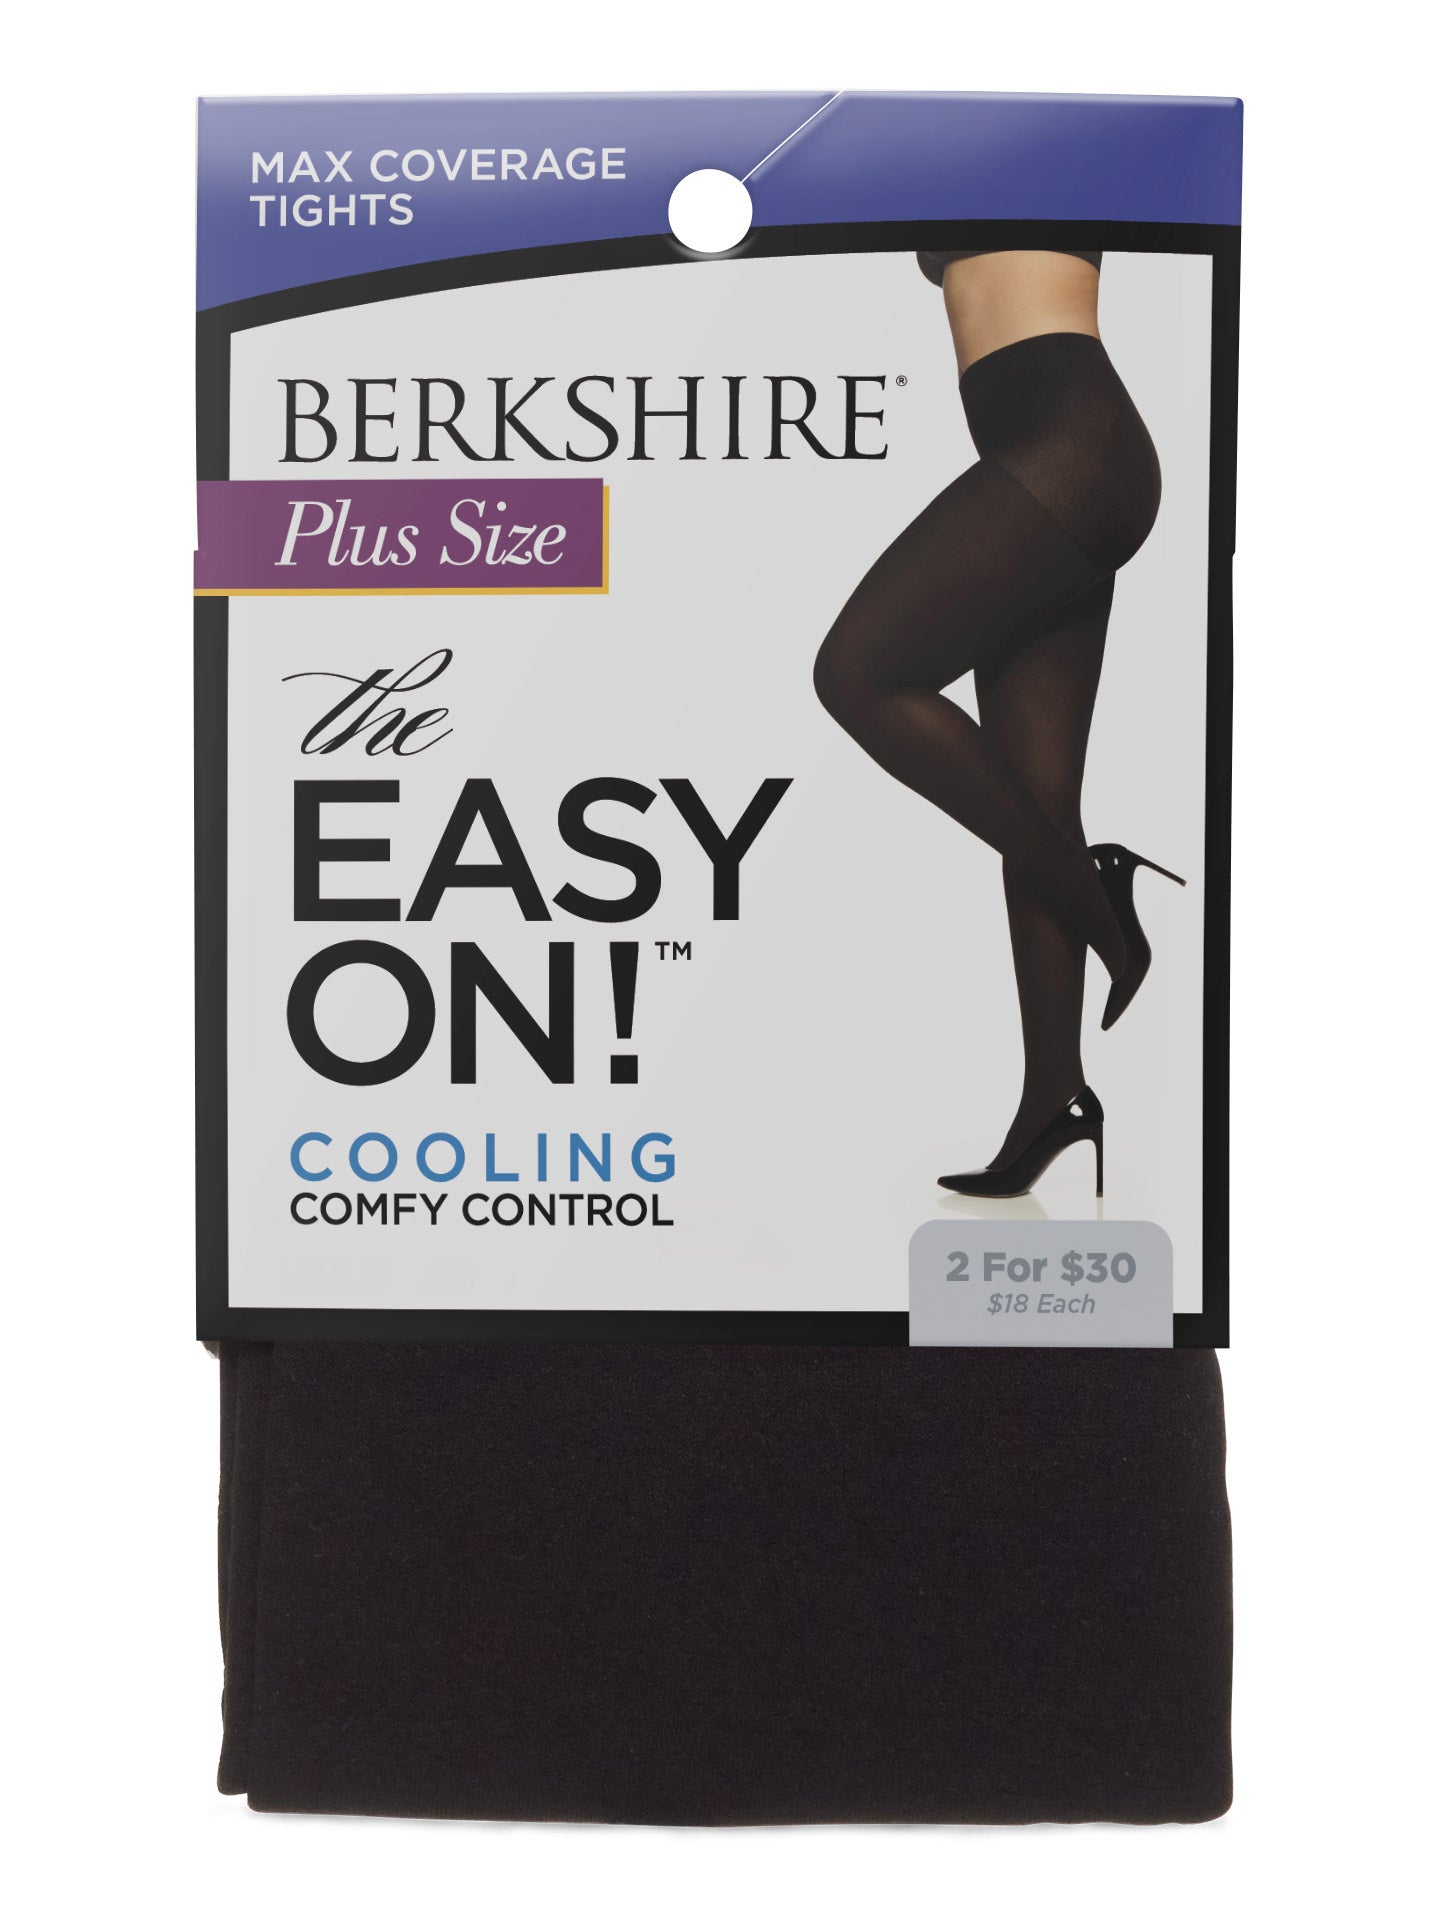 Berkshire The Easy On! Plus Max Coverage Tight - 5036 – Berkshire